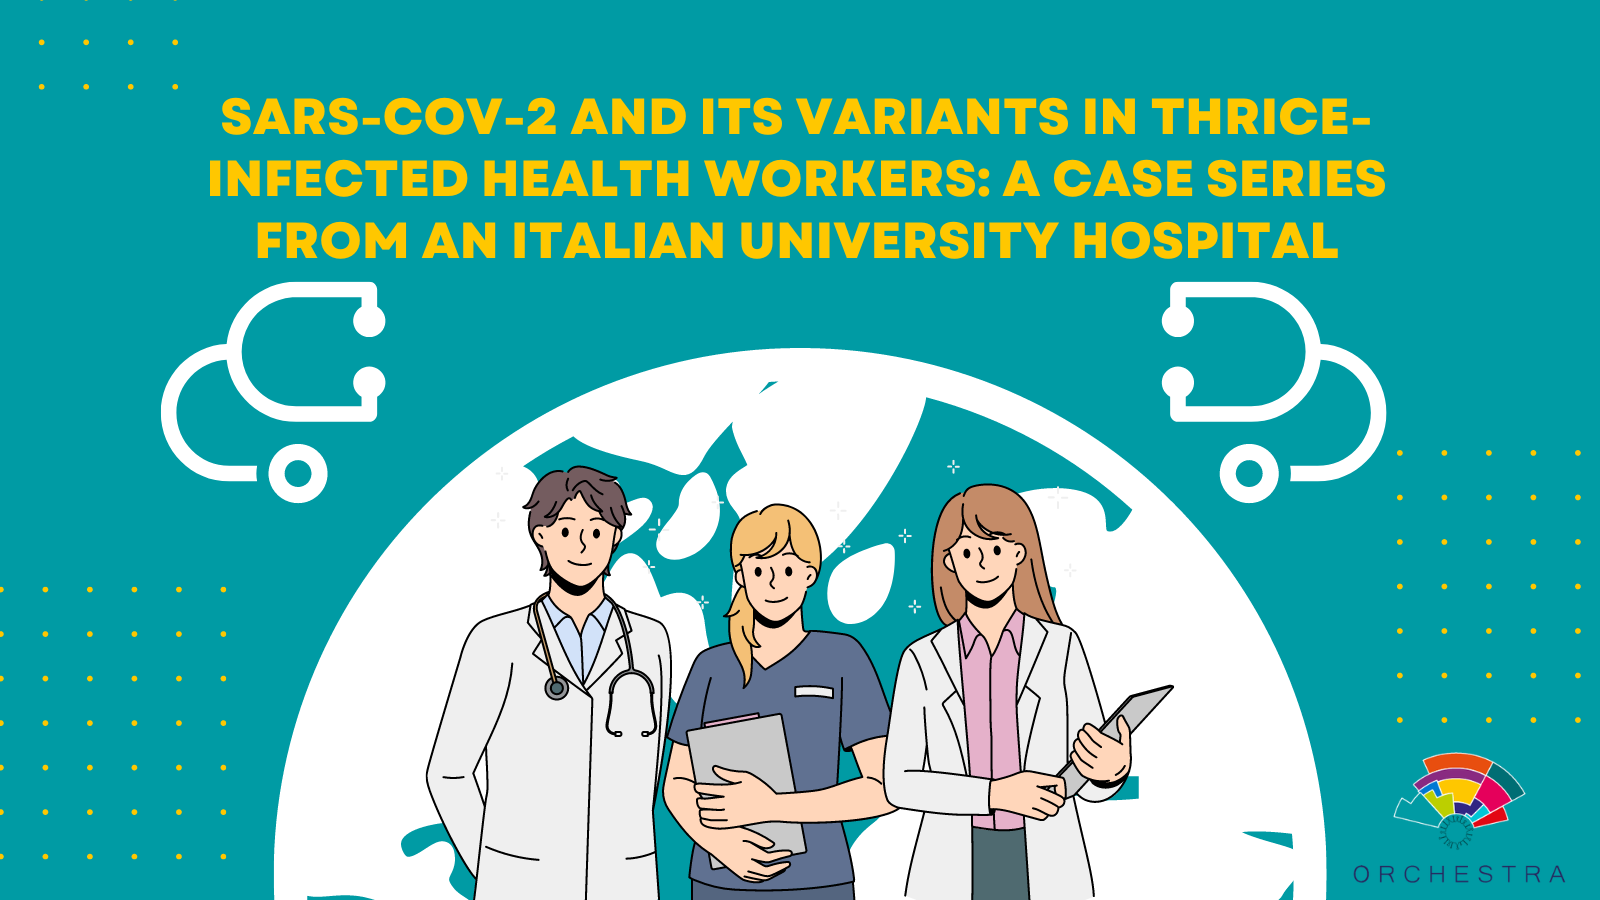 SARS-CoV-2 and Its Variants in Thrice-Infected Health Workers: A Case Series from an Italian University Hospital